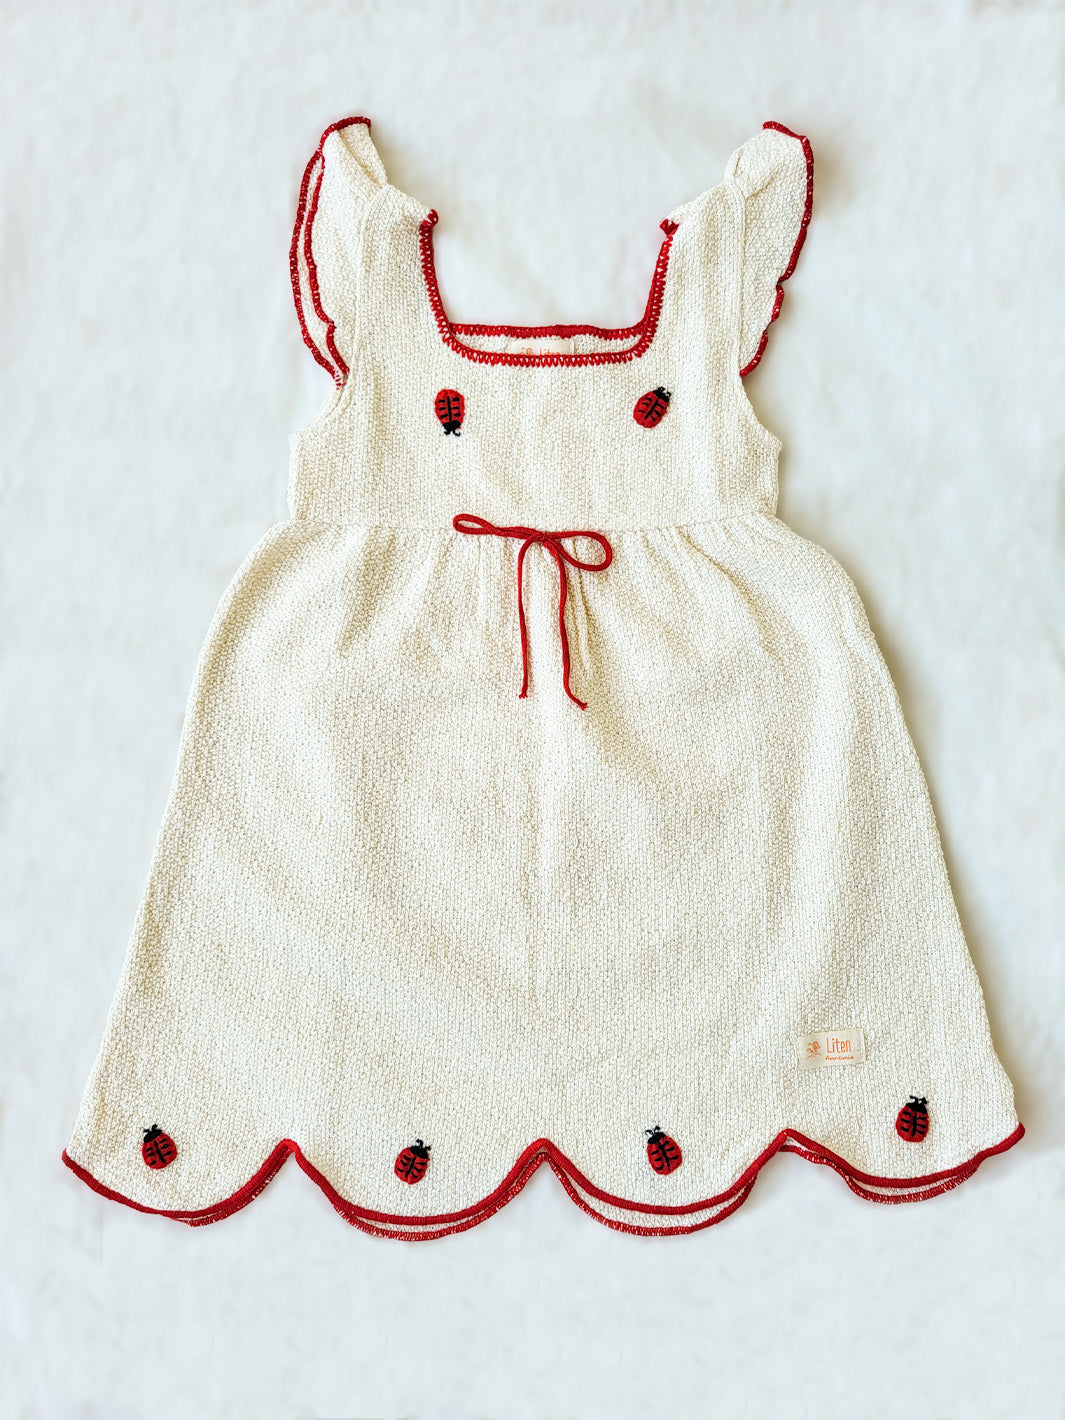 Liten Aventuris Collections. Bring luck and charm to your little one with this Zafirina dress! There's the belief in Italy that a ladybug brings good luck to the person it lands on. And we wanted to bring some luck to your little one. A knitted dress from Peruvian Cotton, and red knitted finishes bring a pop of color to this sweet garment. Hand-embroidered ladybugs playfully perch around the wavy-cut skirt, it's easy to see why Italy believes in good luck! Bomullsklänning för babis och flickor.